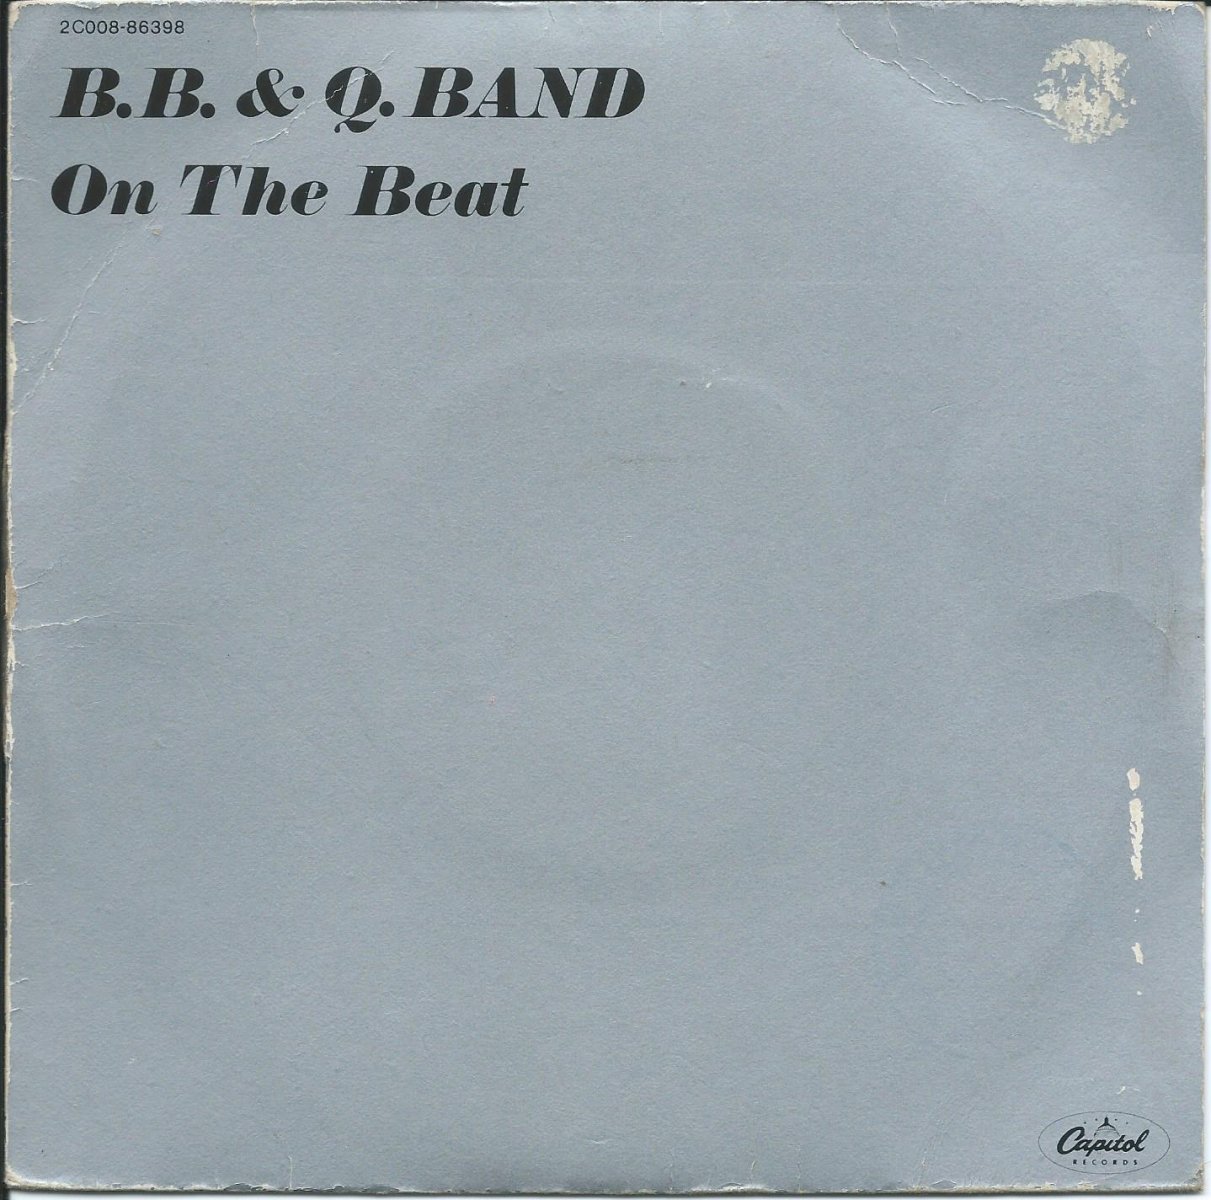 THE B.B. & Q.BAND / ON THE BEAT / DON'T SAY GOODBYE (7